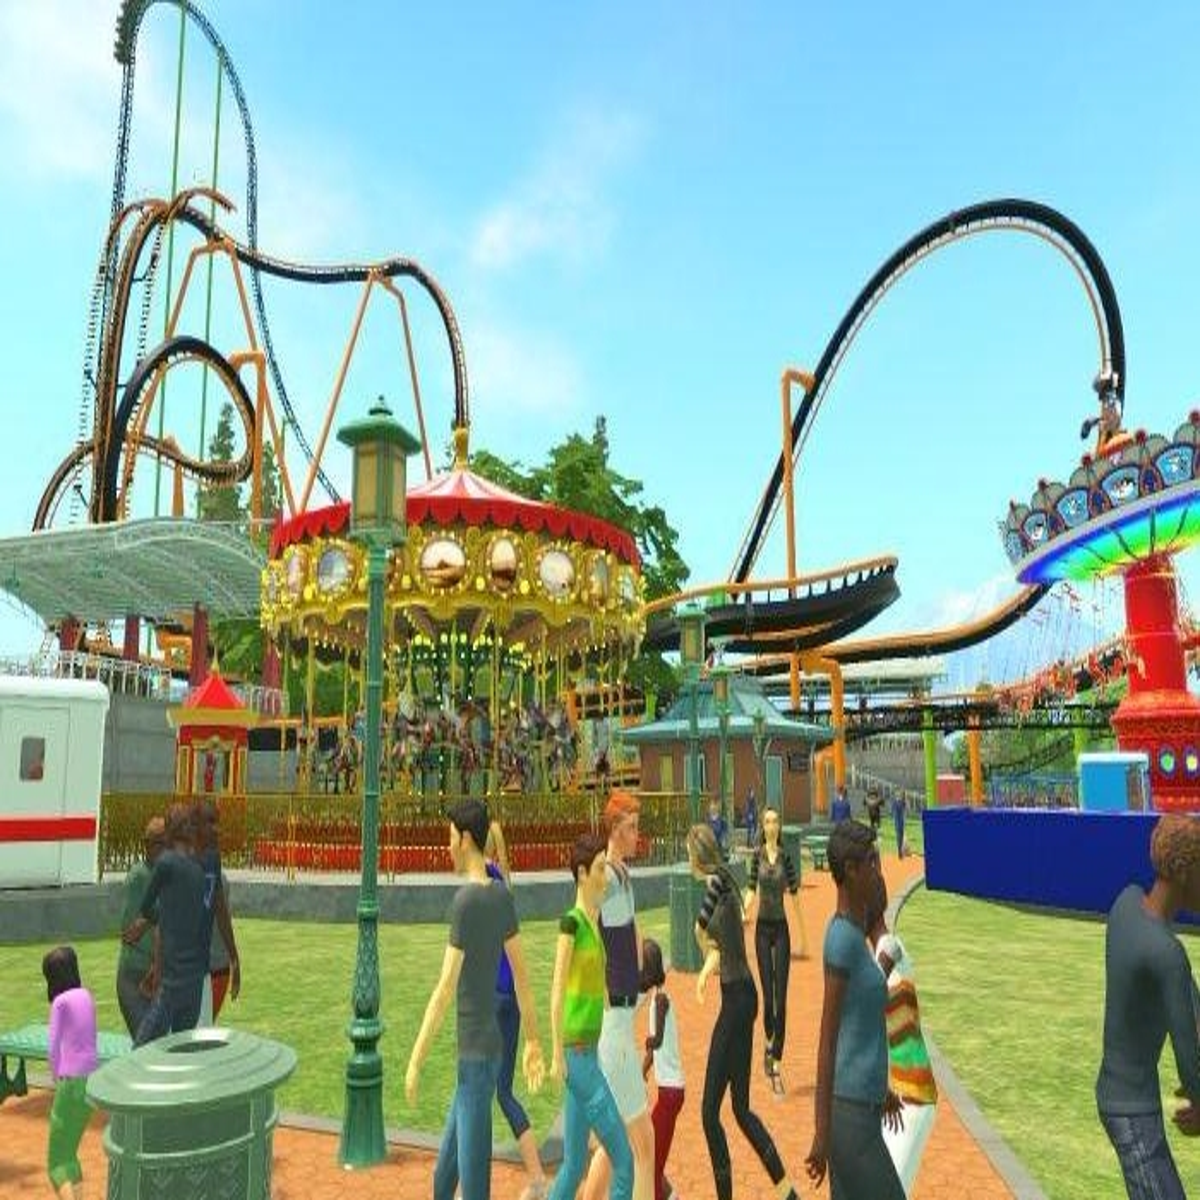 RollerCoaster Tycoon Game Facts